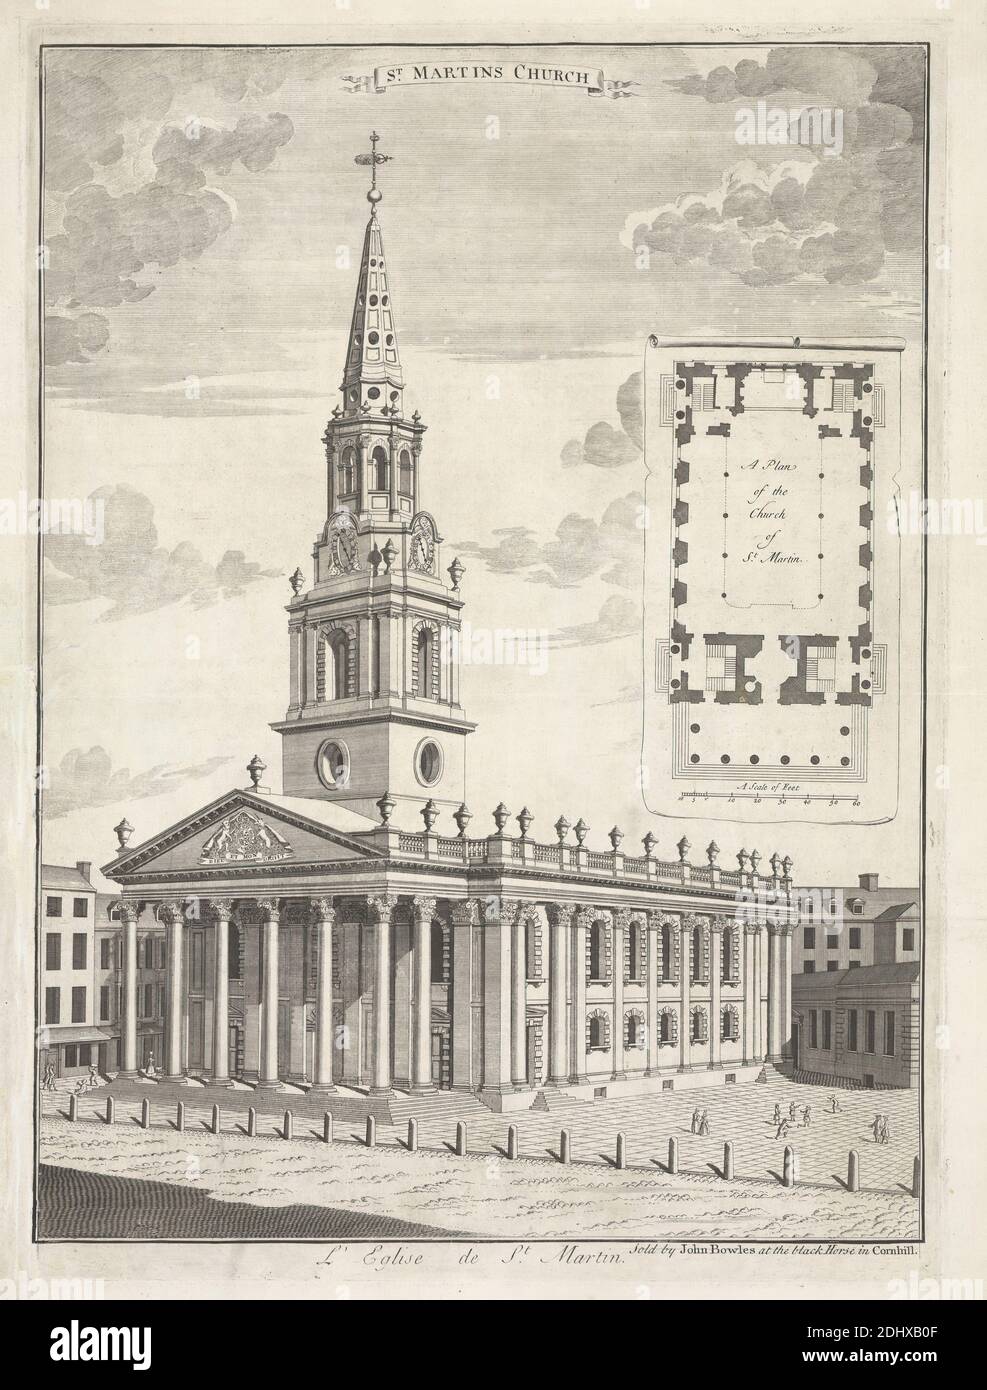 St. Martin's Church, Print made by unknown artist, Published by John Bowles, 1701–1779, British, between 1731 and 1754, Etching on moderately thick, slightly textured, cream laid paper, Sheet: 19 5/16 x 14 3/4 inches (49 x 37.5 cm), Plate: 18 3/8 x 13 7/16 inches (46.6 x 34.2 cm), and Image: 17 1/2 x 13 1/16 inches (44.5 x 33.1 cm), arches, architectural drawing, architectural subject, architecture, banners, buildings, children, church, city, cityscape, clocks, clouds, coat of arms, coats, columns (architectural elements), costume, crest, cross (object), dresses, games, genre subject, hats Stock Photo